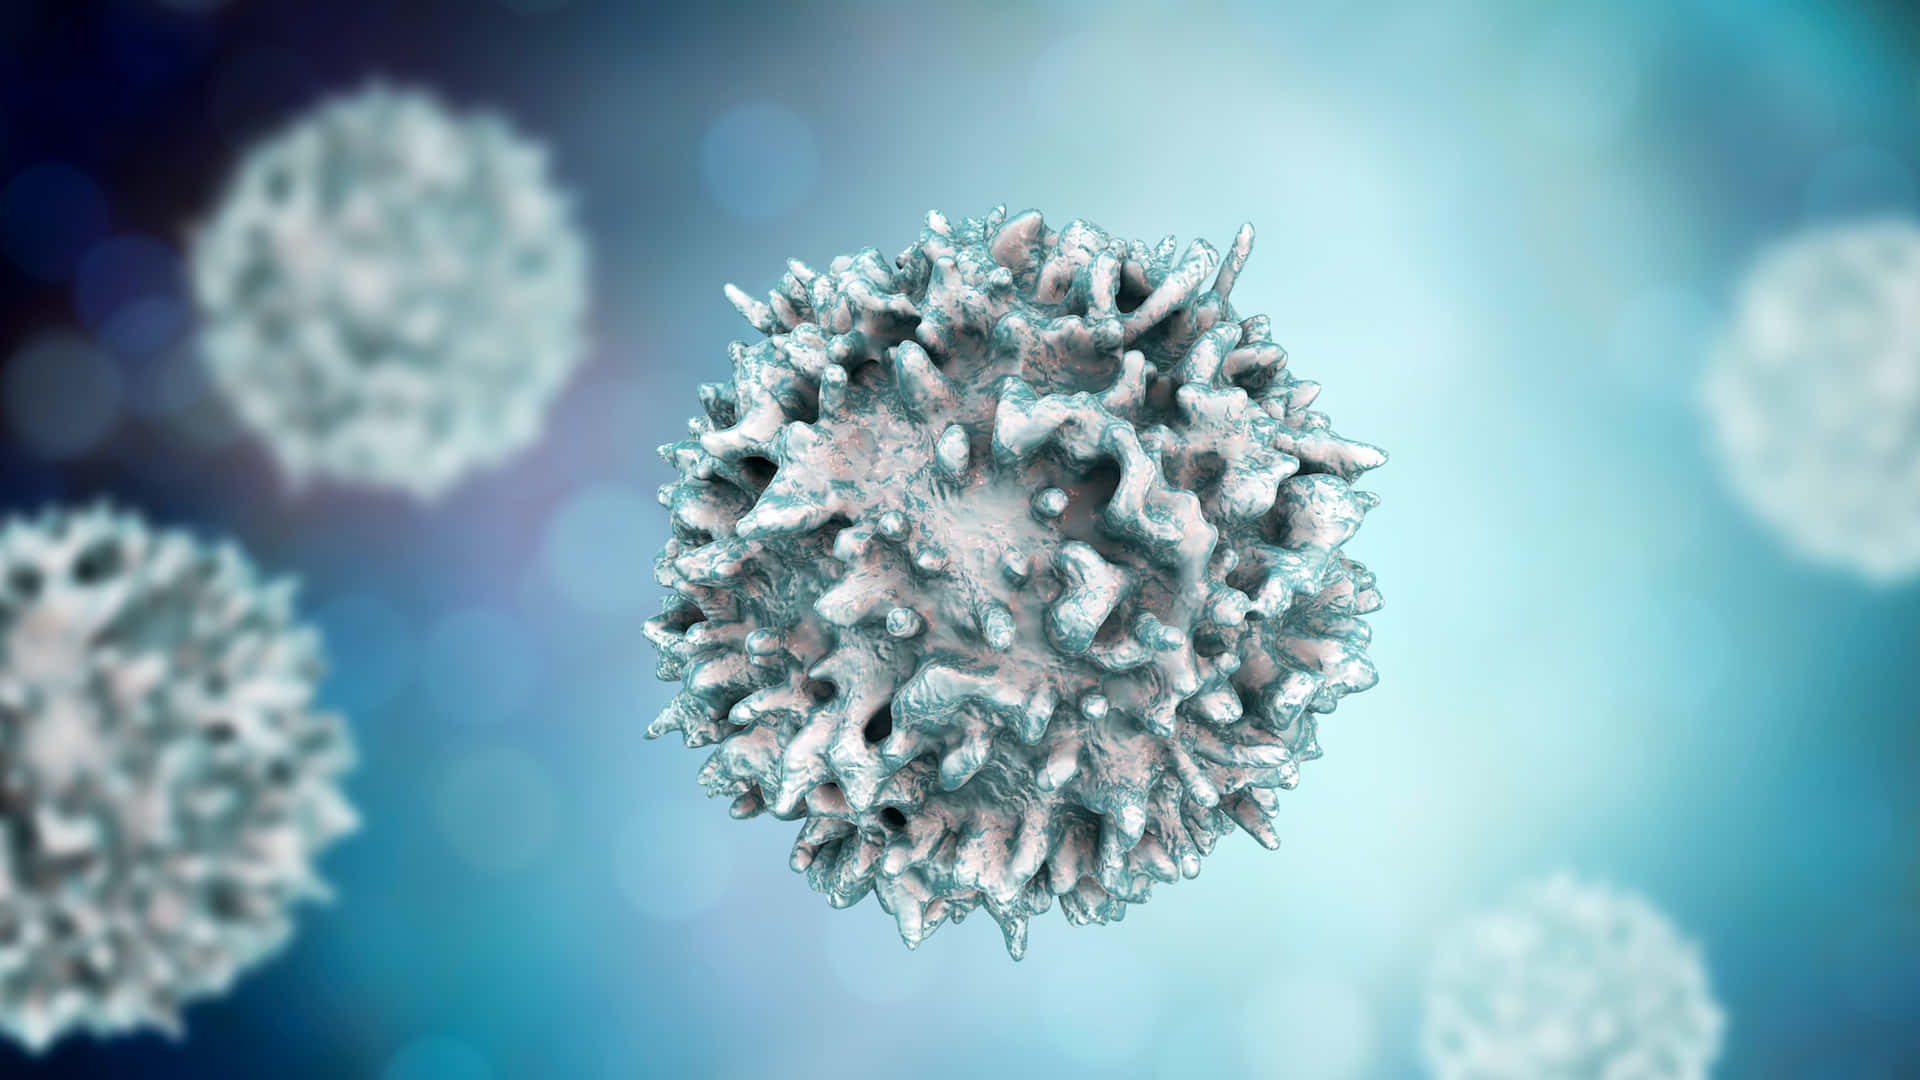 A White Virus Is Shown In The Background